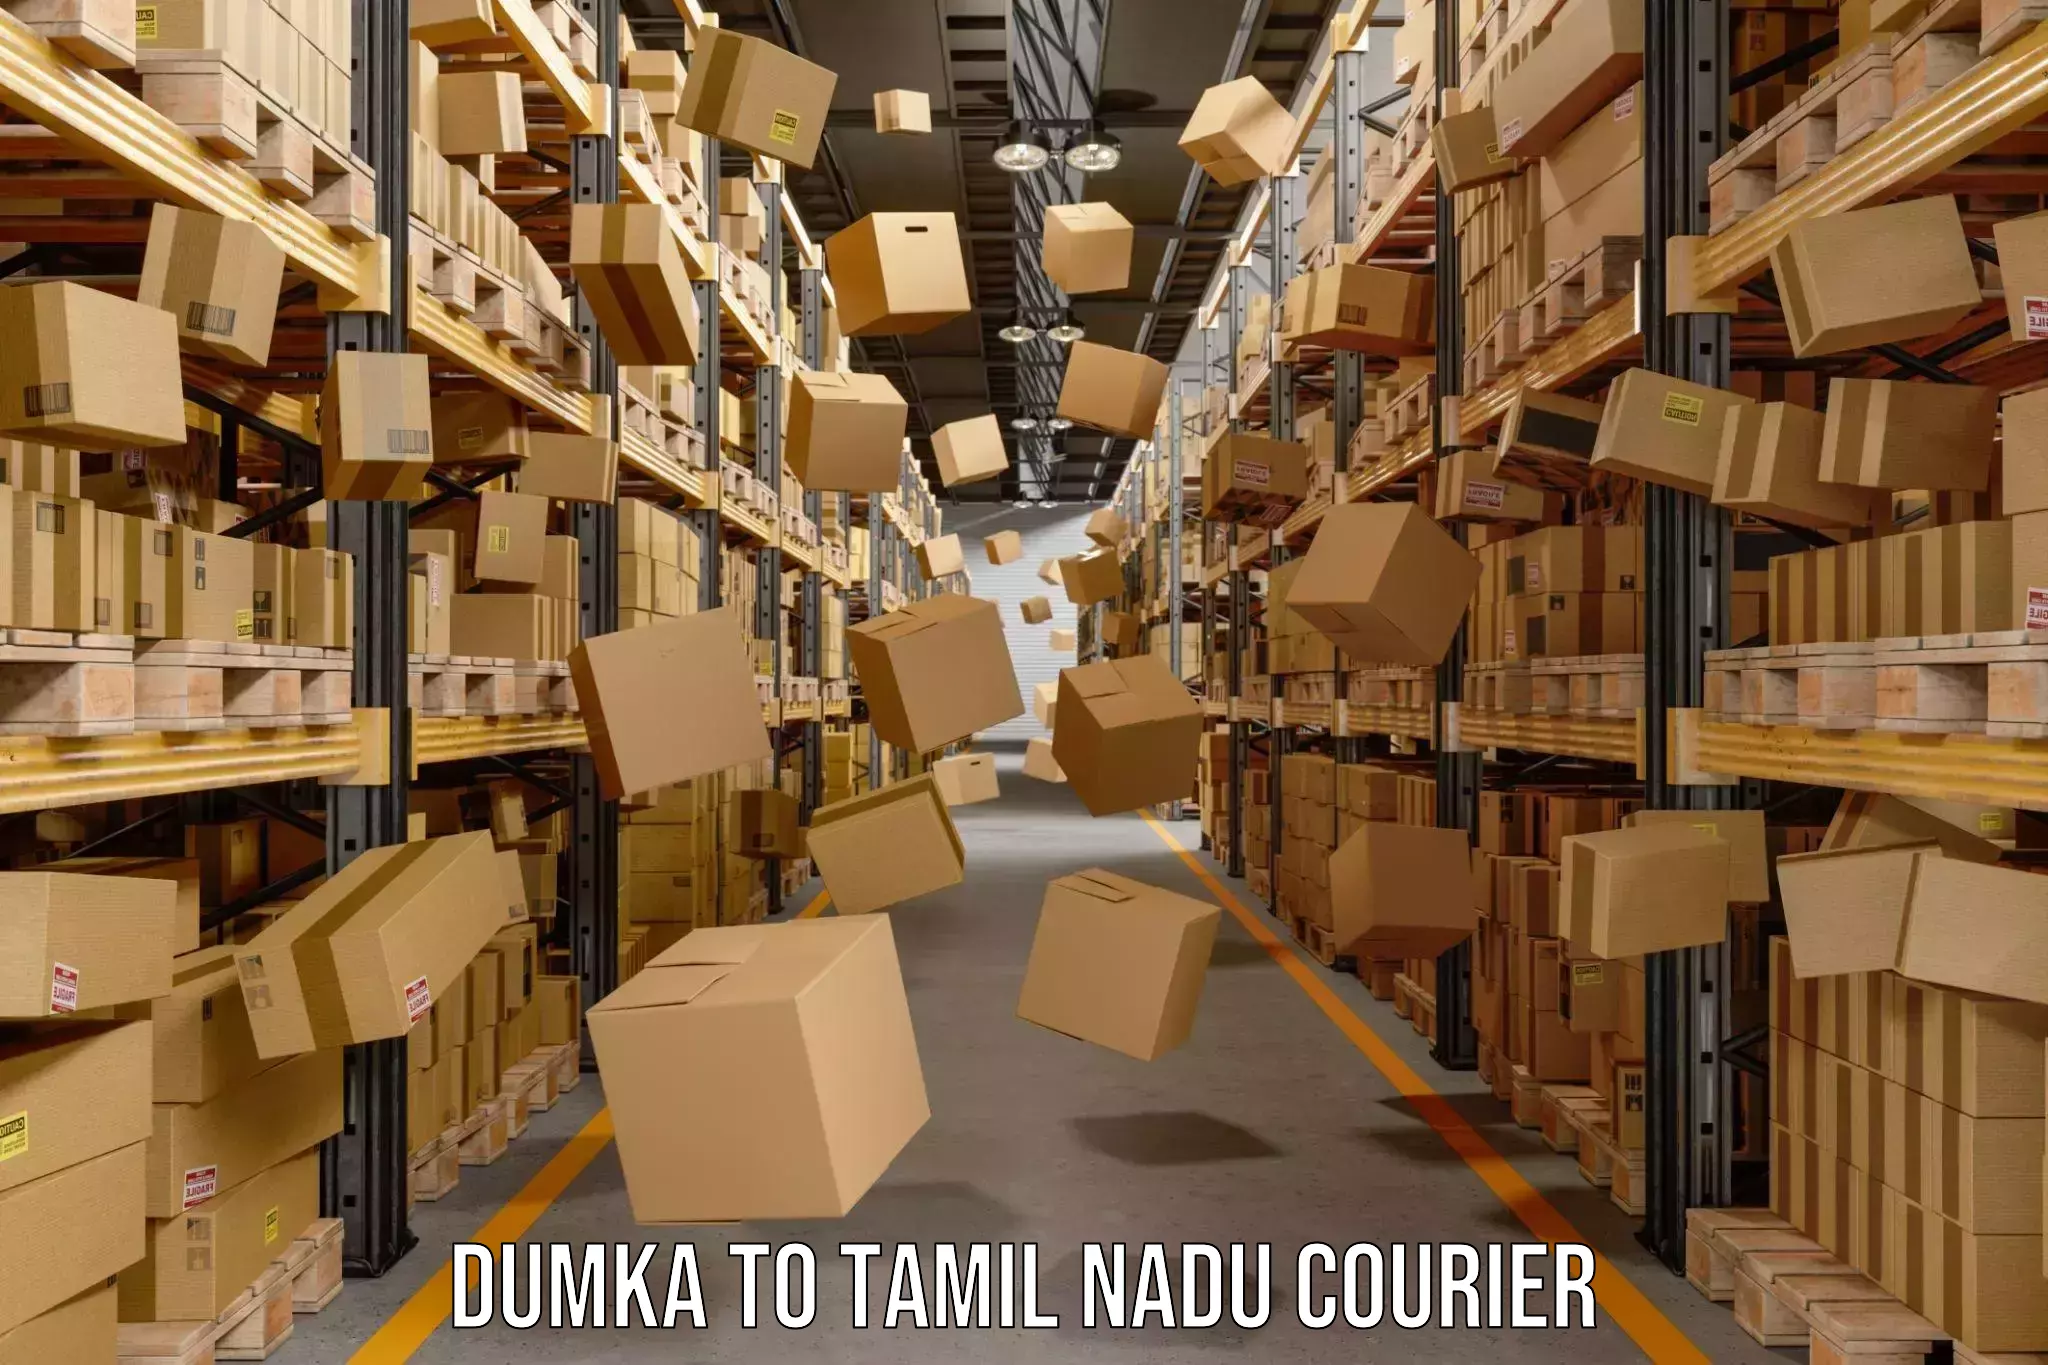 State-of-the-art courier technology Dumka to Tamil Nadu